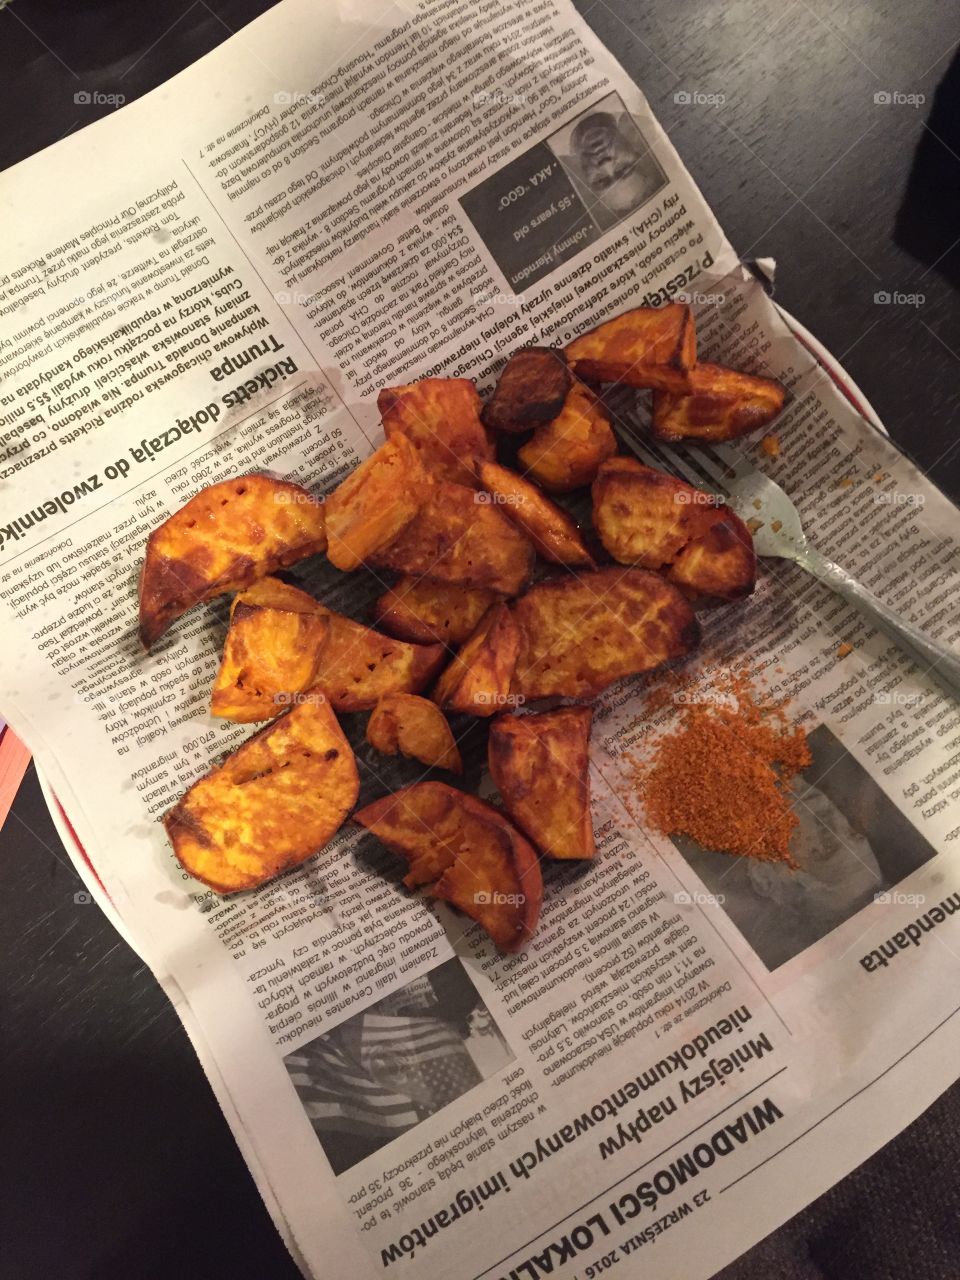 Fried potato and hot spice